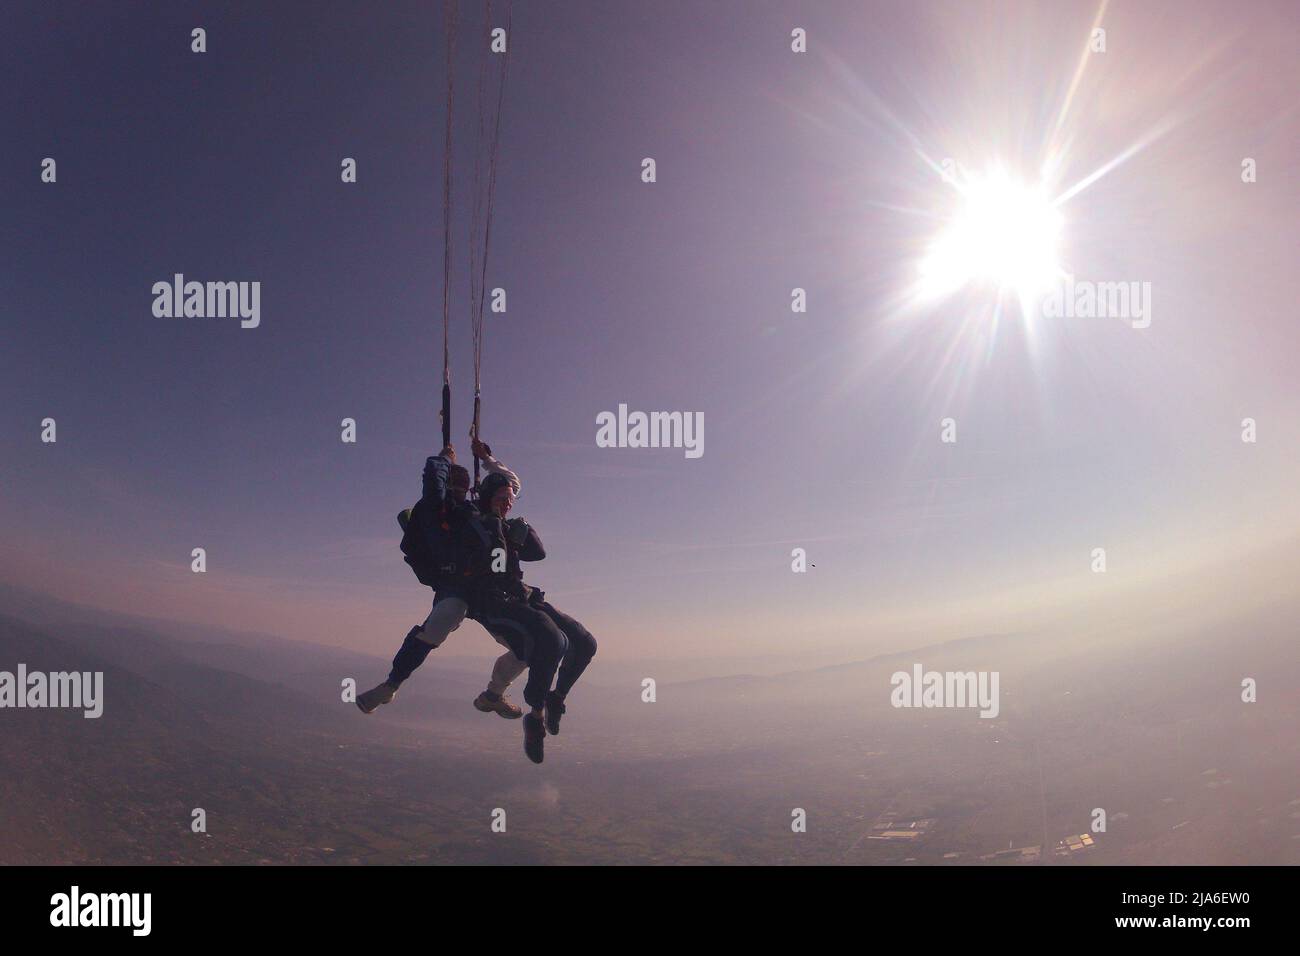 jump with an instructor in tandem in evening and  clear good weather, before sunset Stock Photo